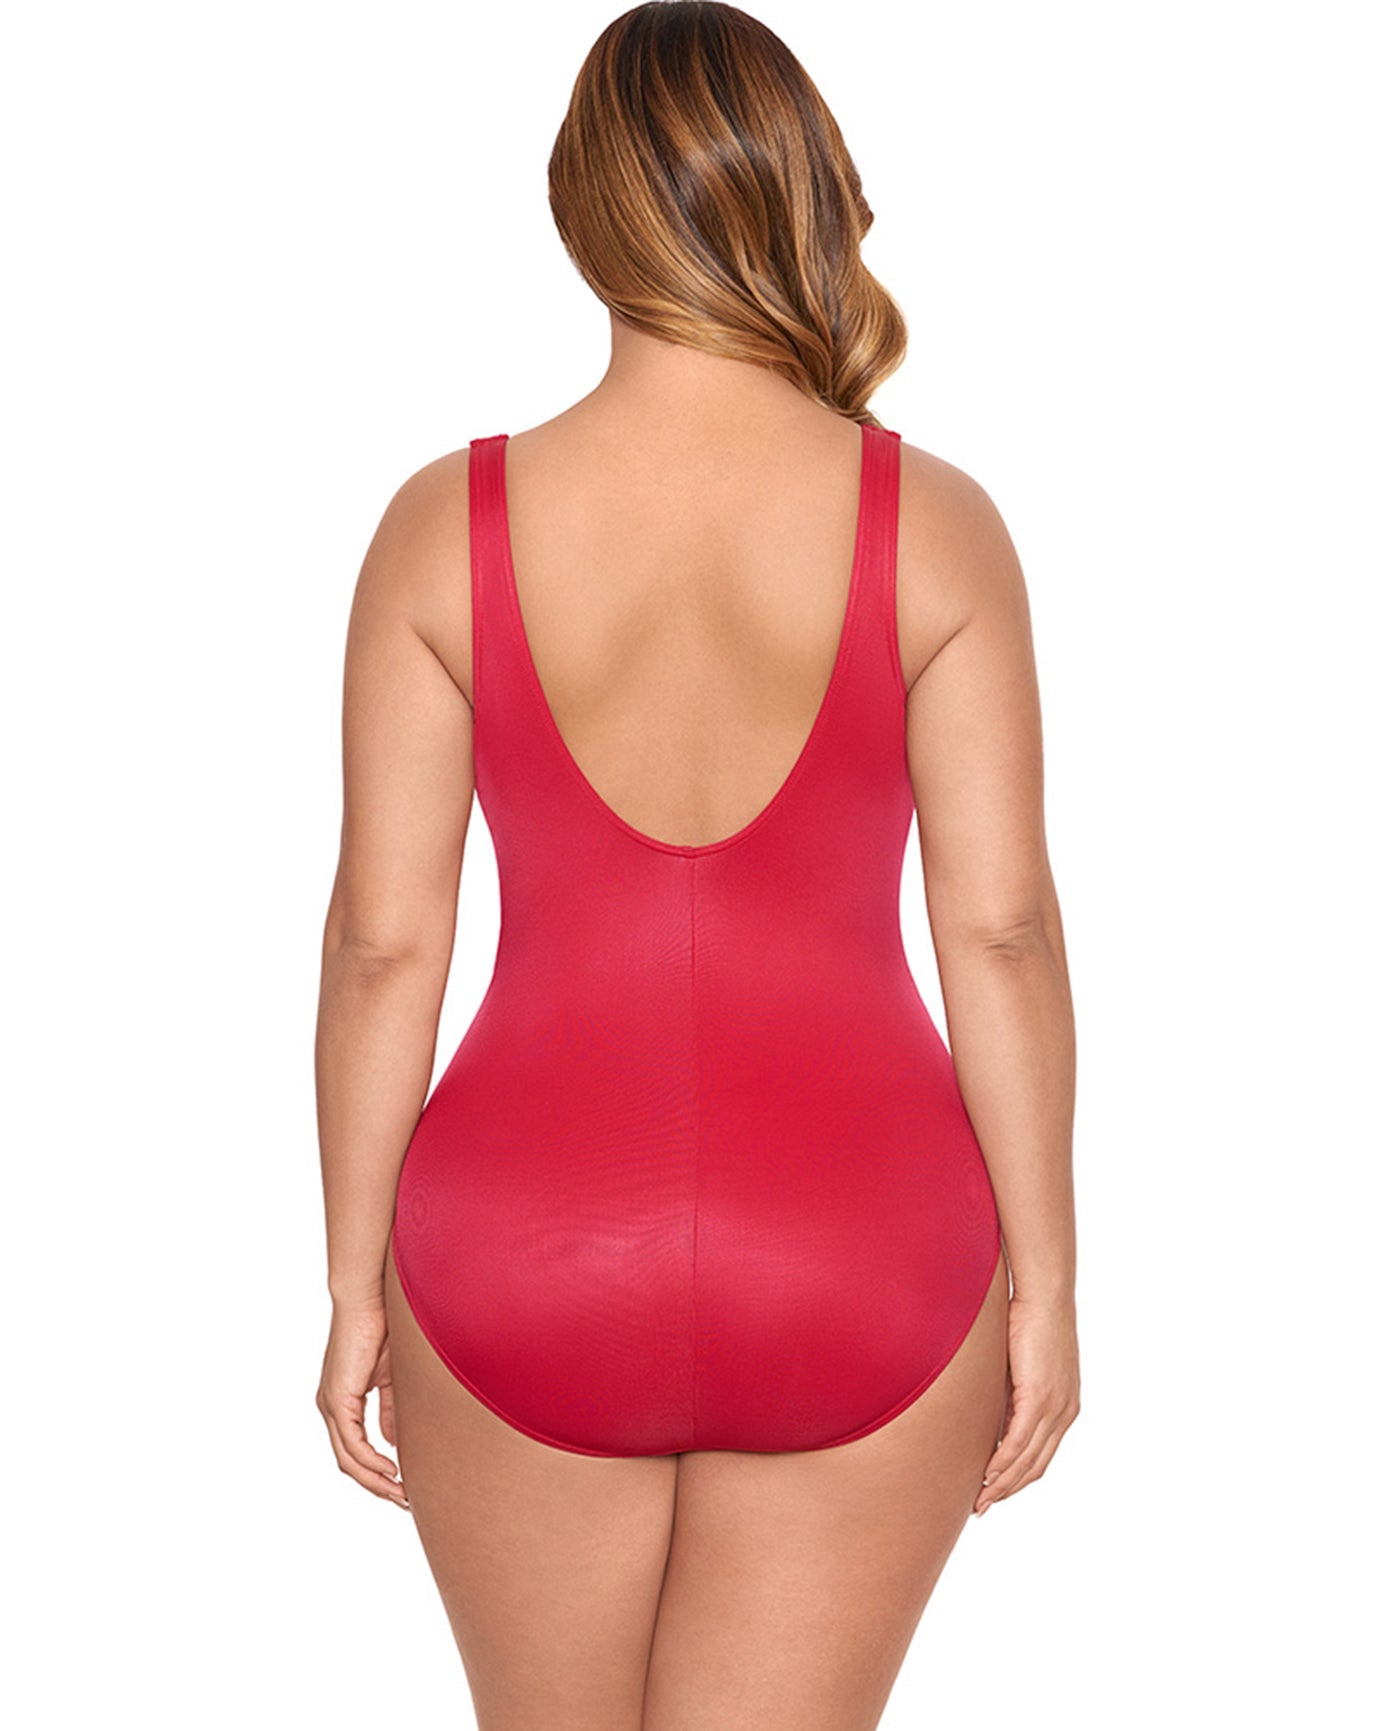 Back View Of Miraclesuit Grenadine Must Have Escape Underwire Plus Size One Piece Swimsuit | MIR RED